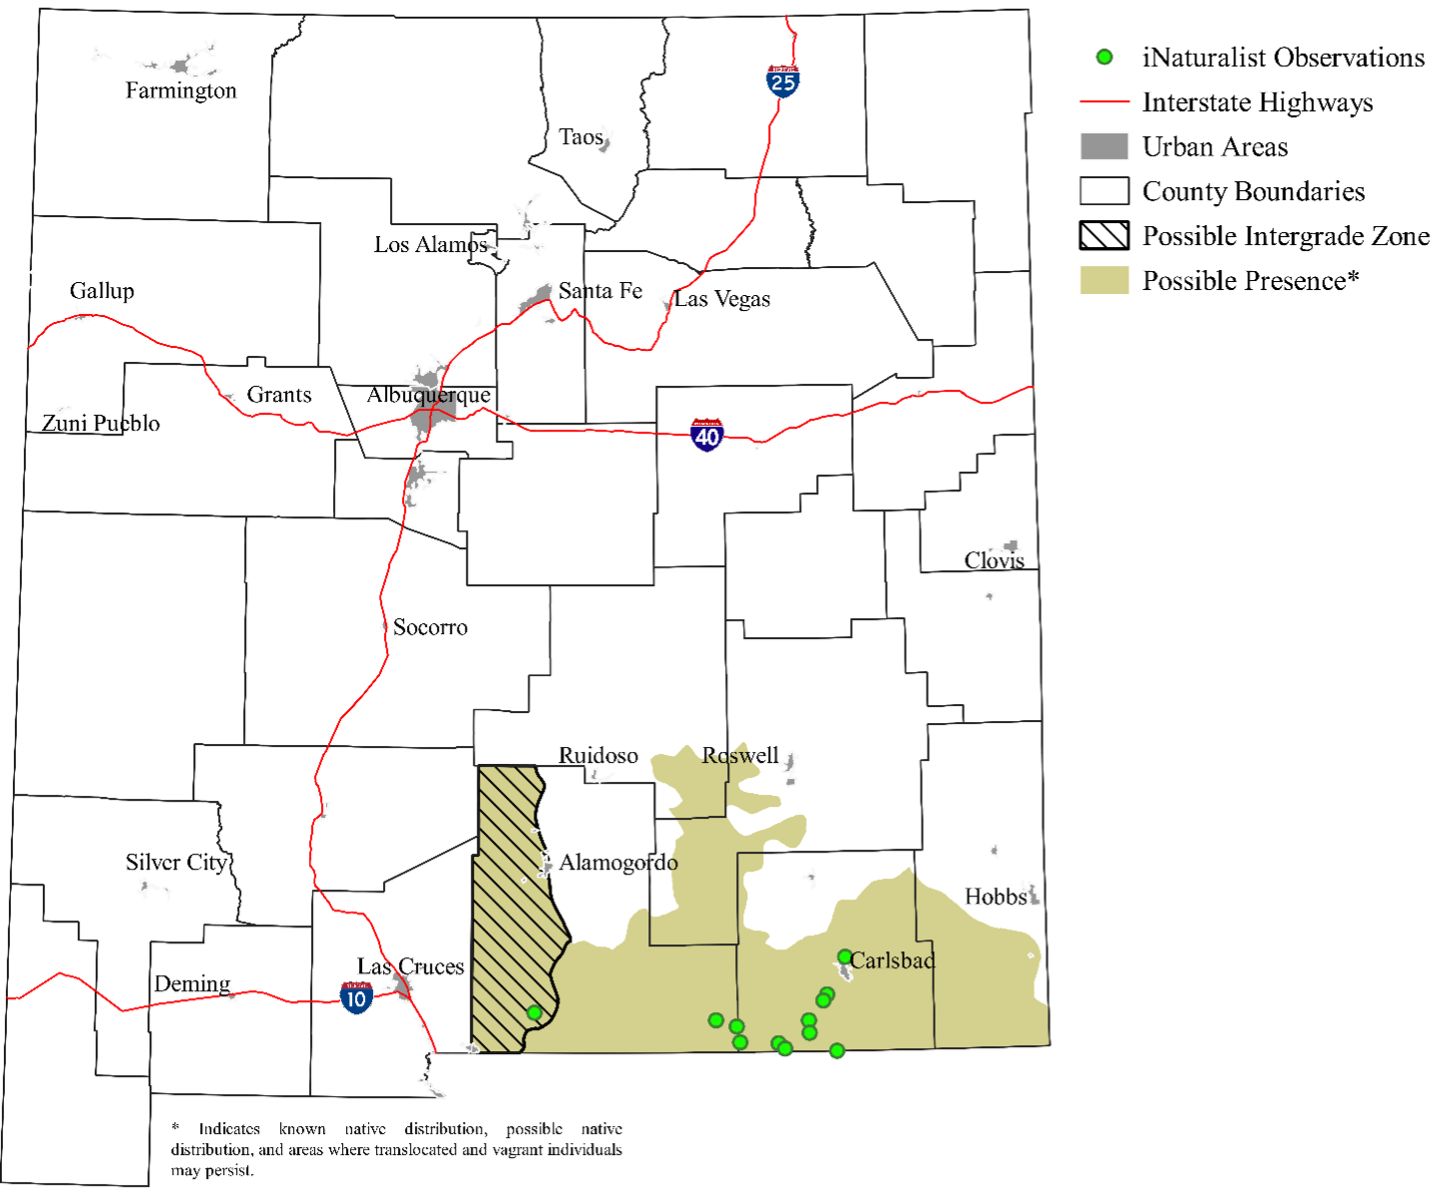 Observations and projected distribution of the mottled rock rattlesnake in New Mexico. Western Otero County, where the two subspecies potentially meet, is a potential intergrade zone (an area where the two subspecies are potentially interbreeding).